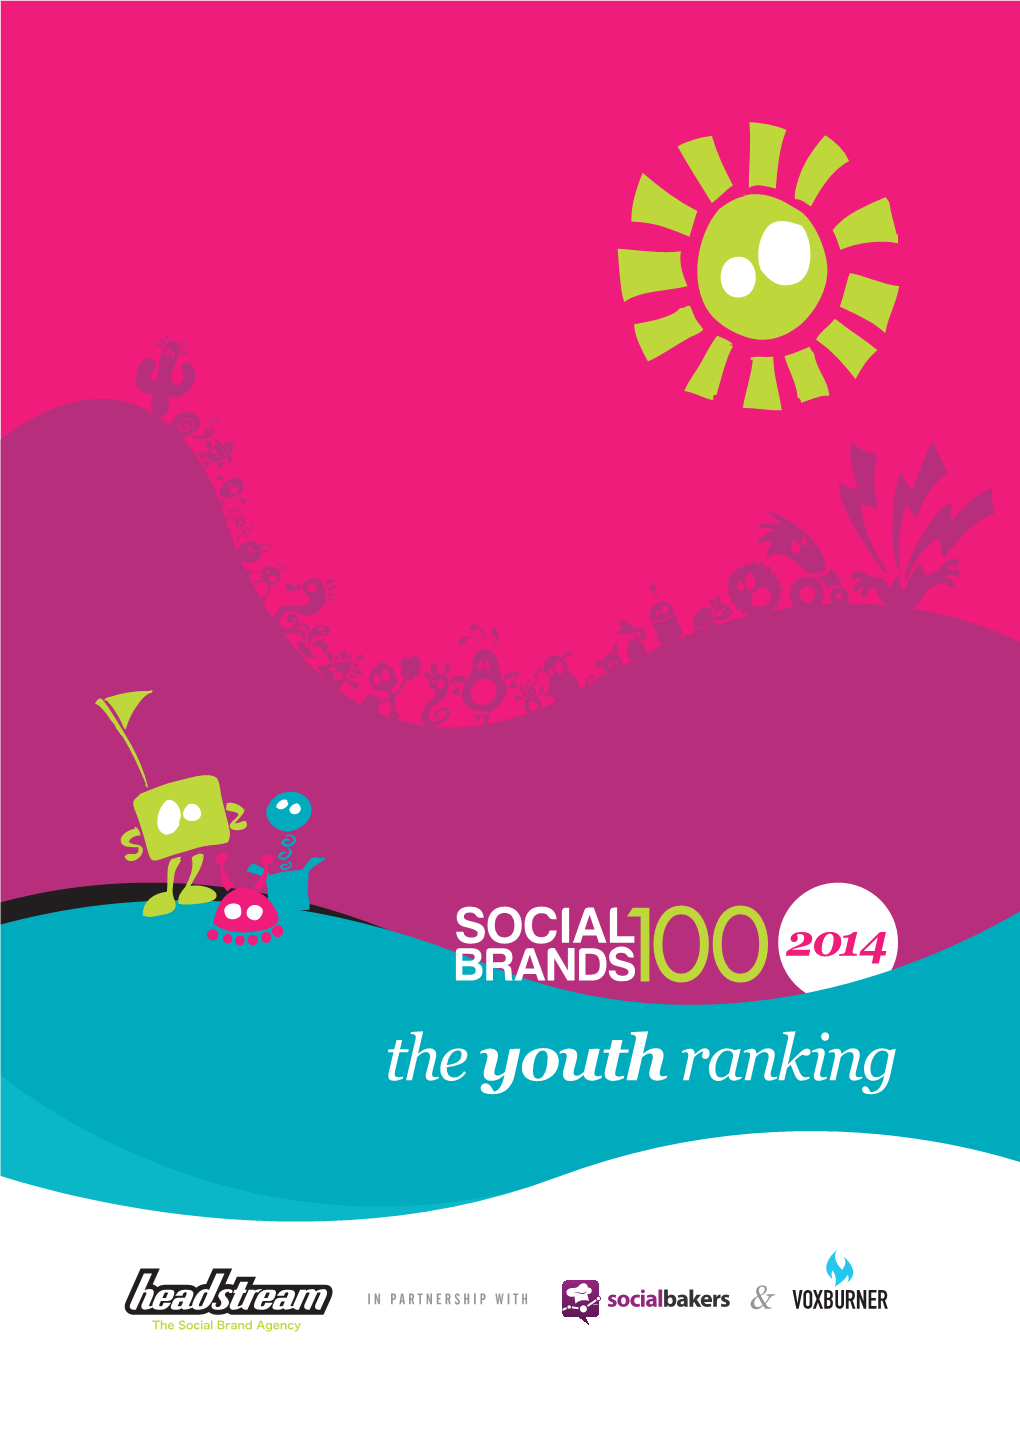 The Youth Ranking